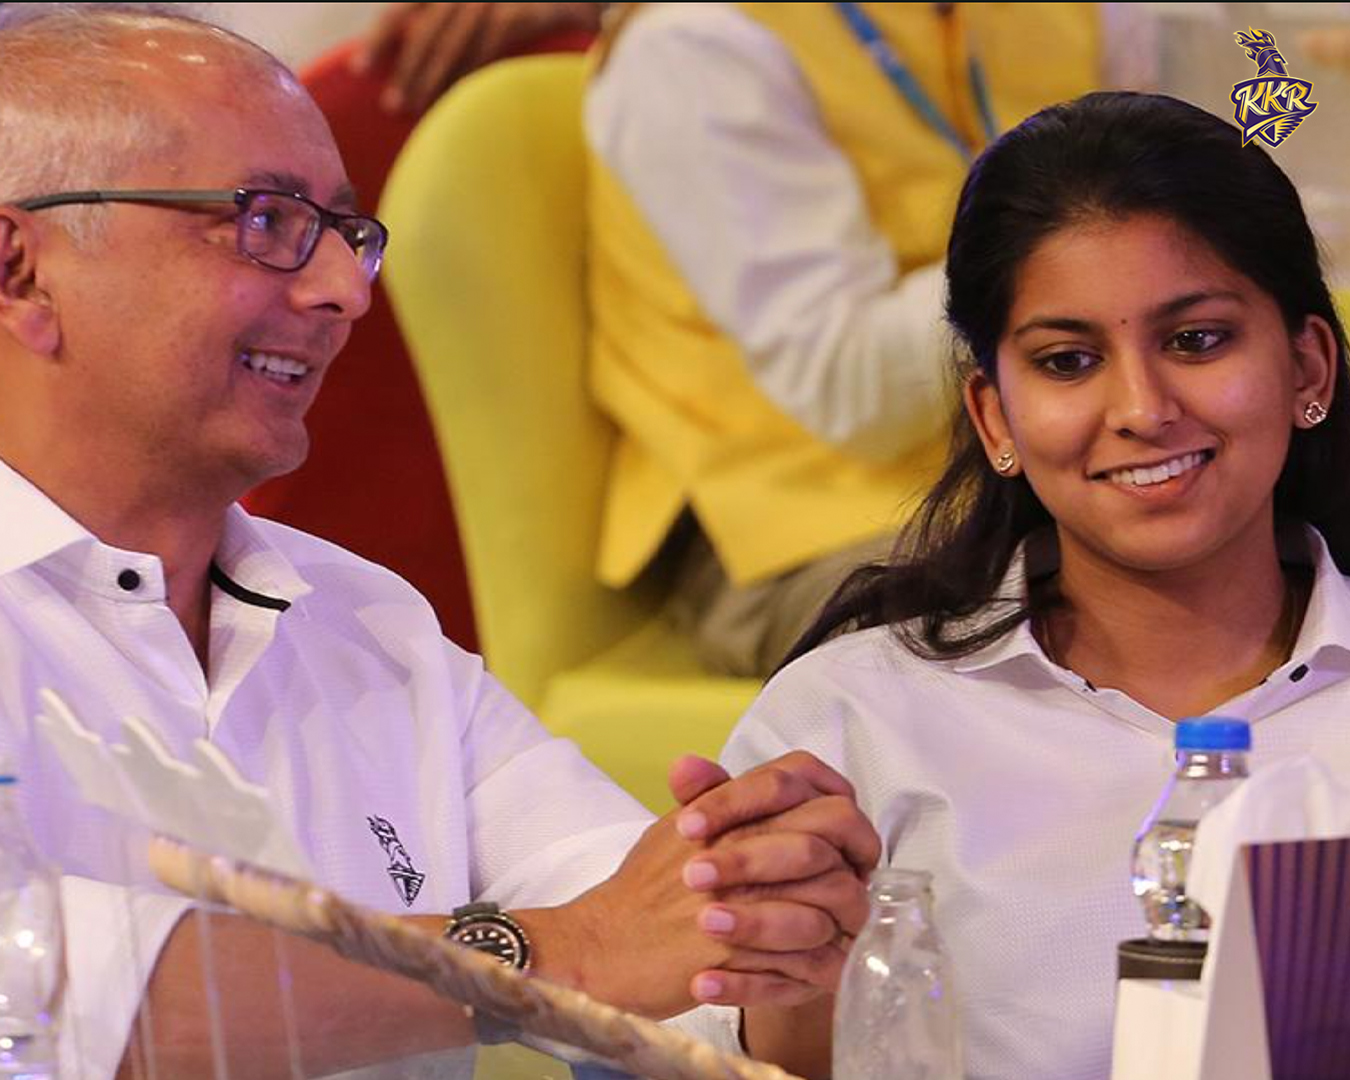 This popular actress’ daughter sets a record of being the youngest person at the IPL Auction ft Juhi Chawla